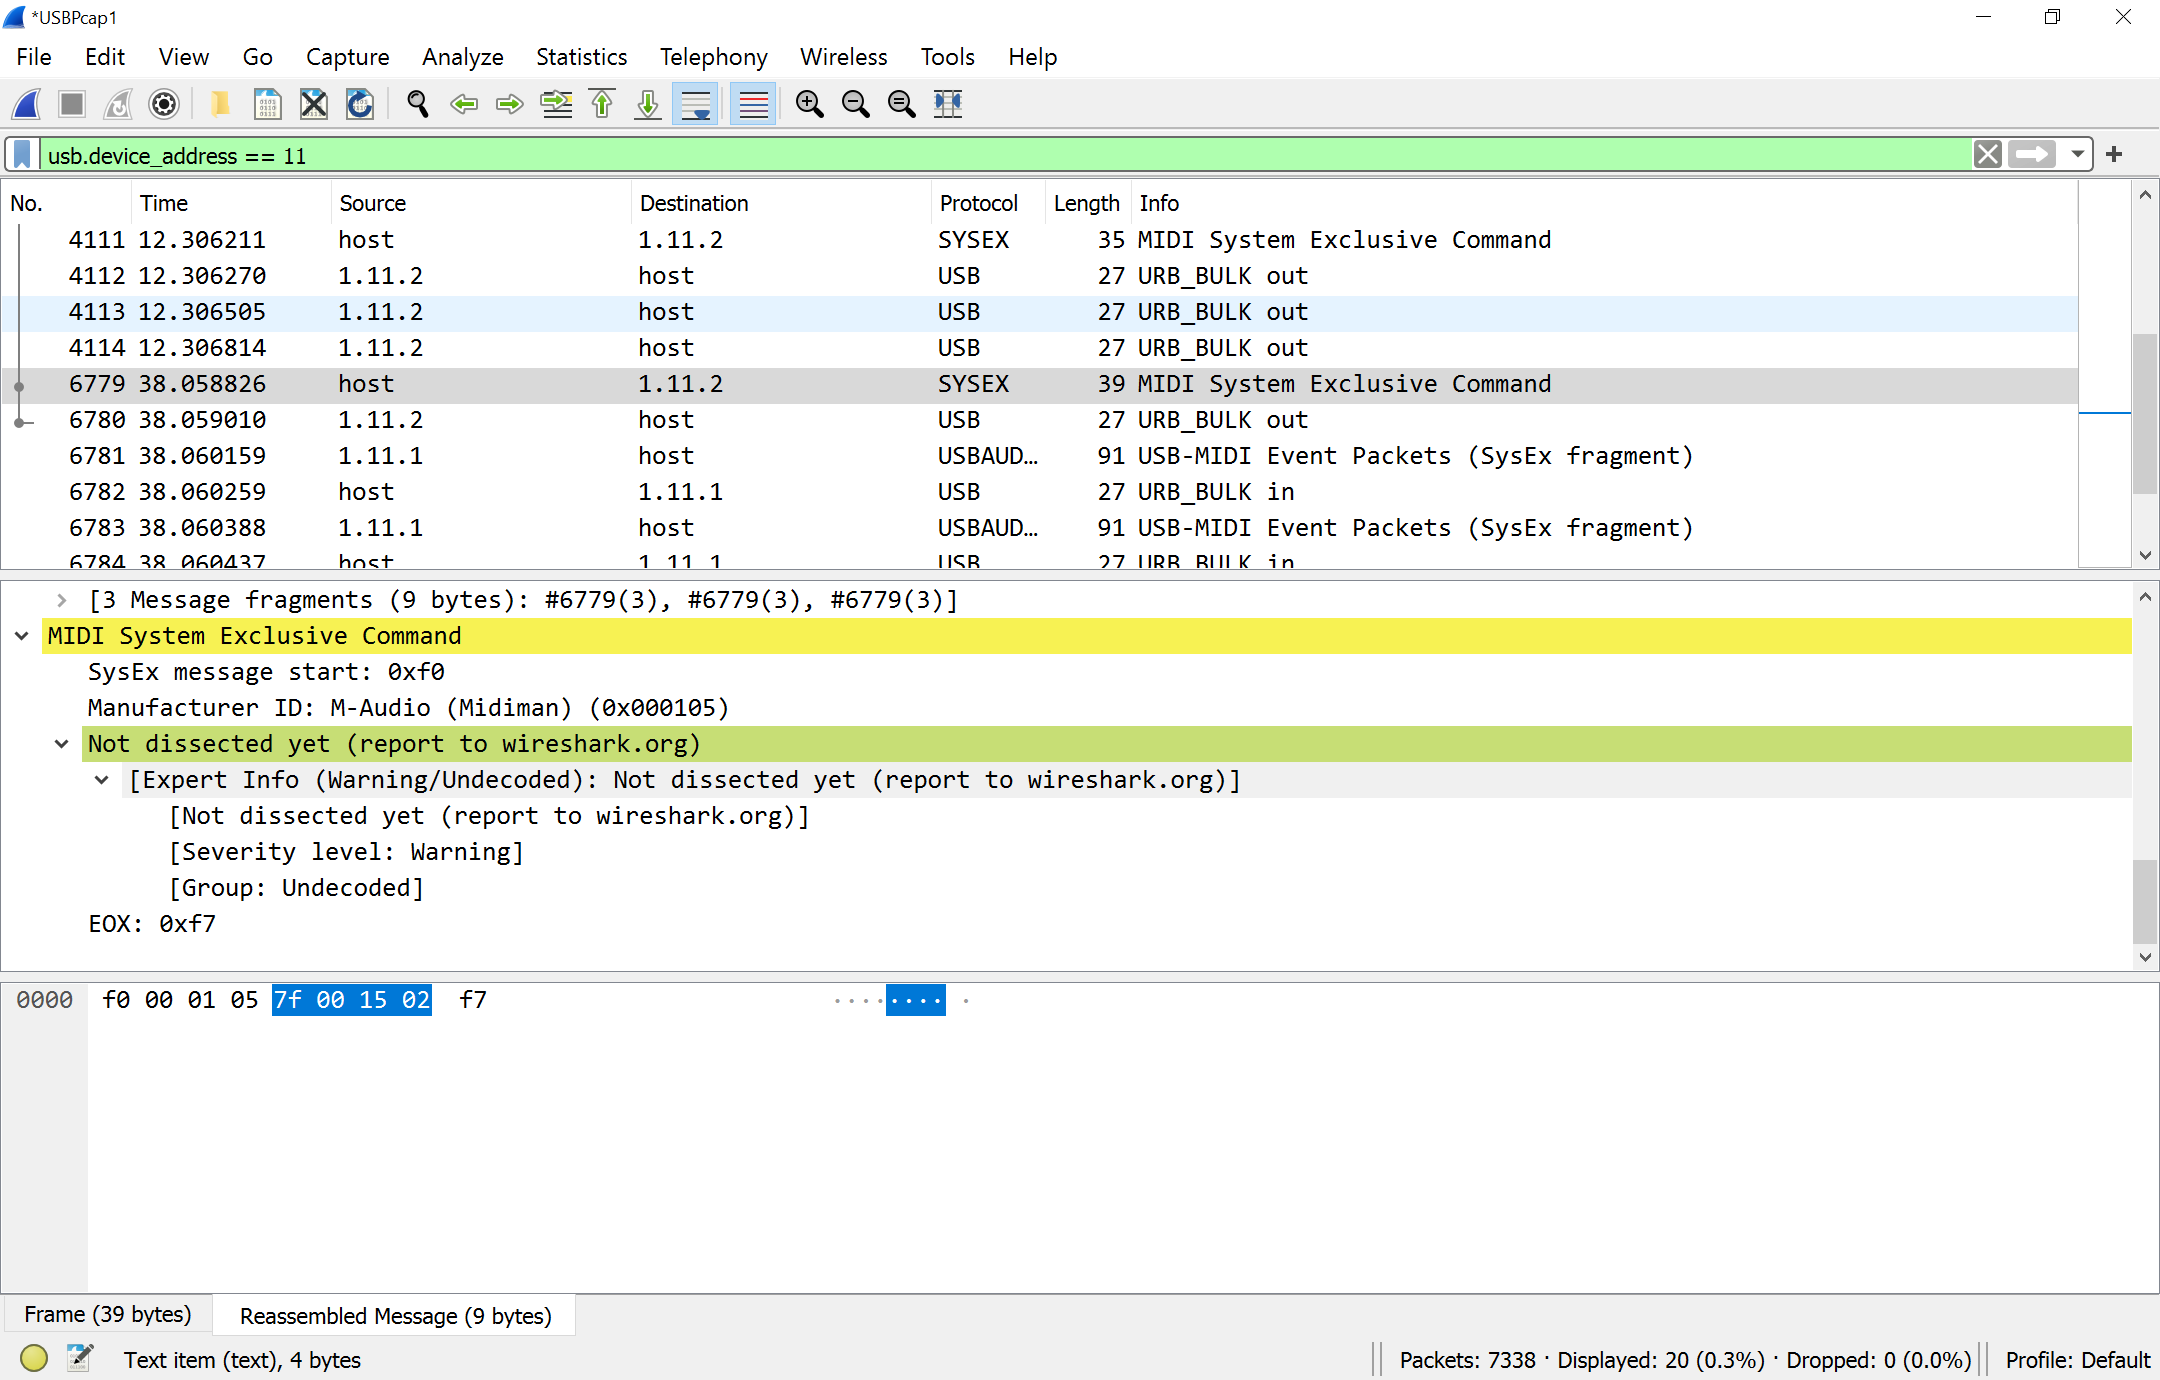 wireshark window, with a (short) request in hex